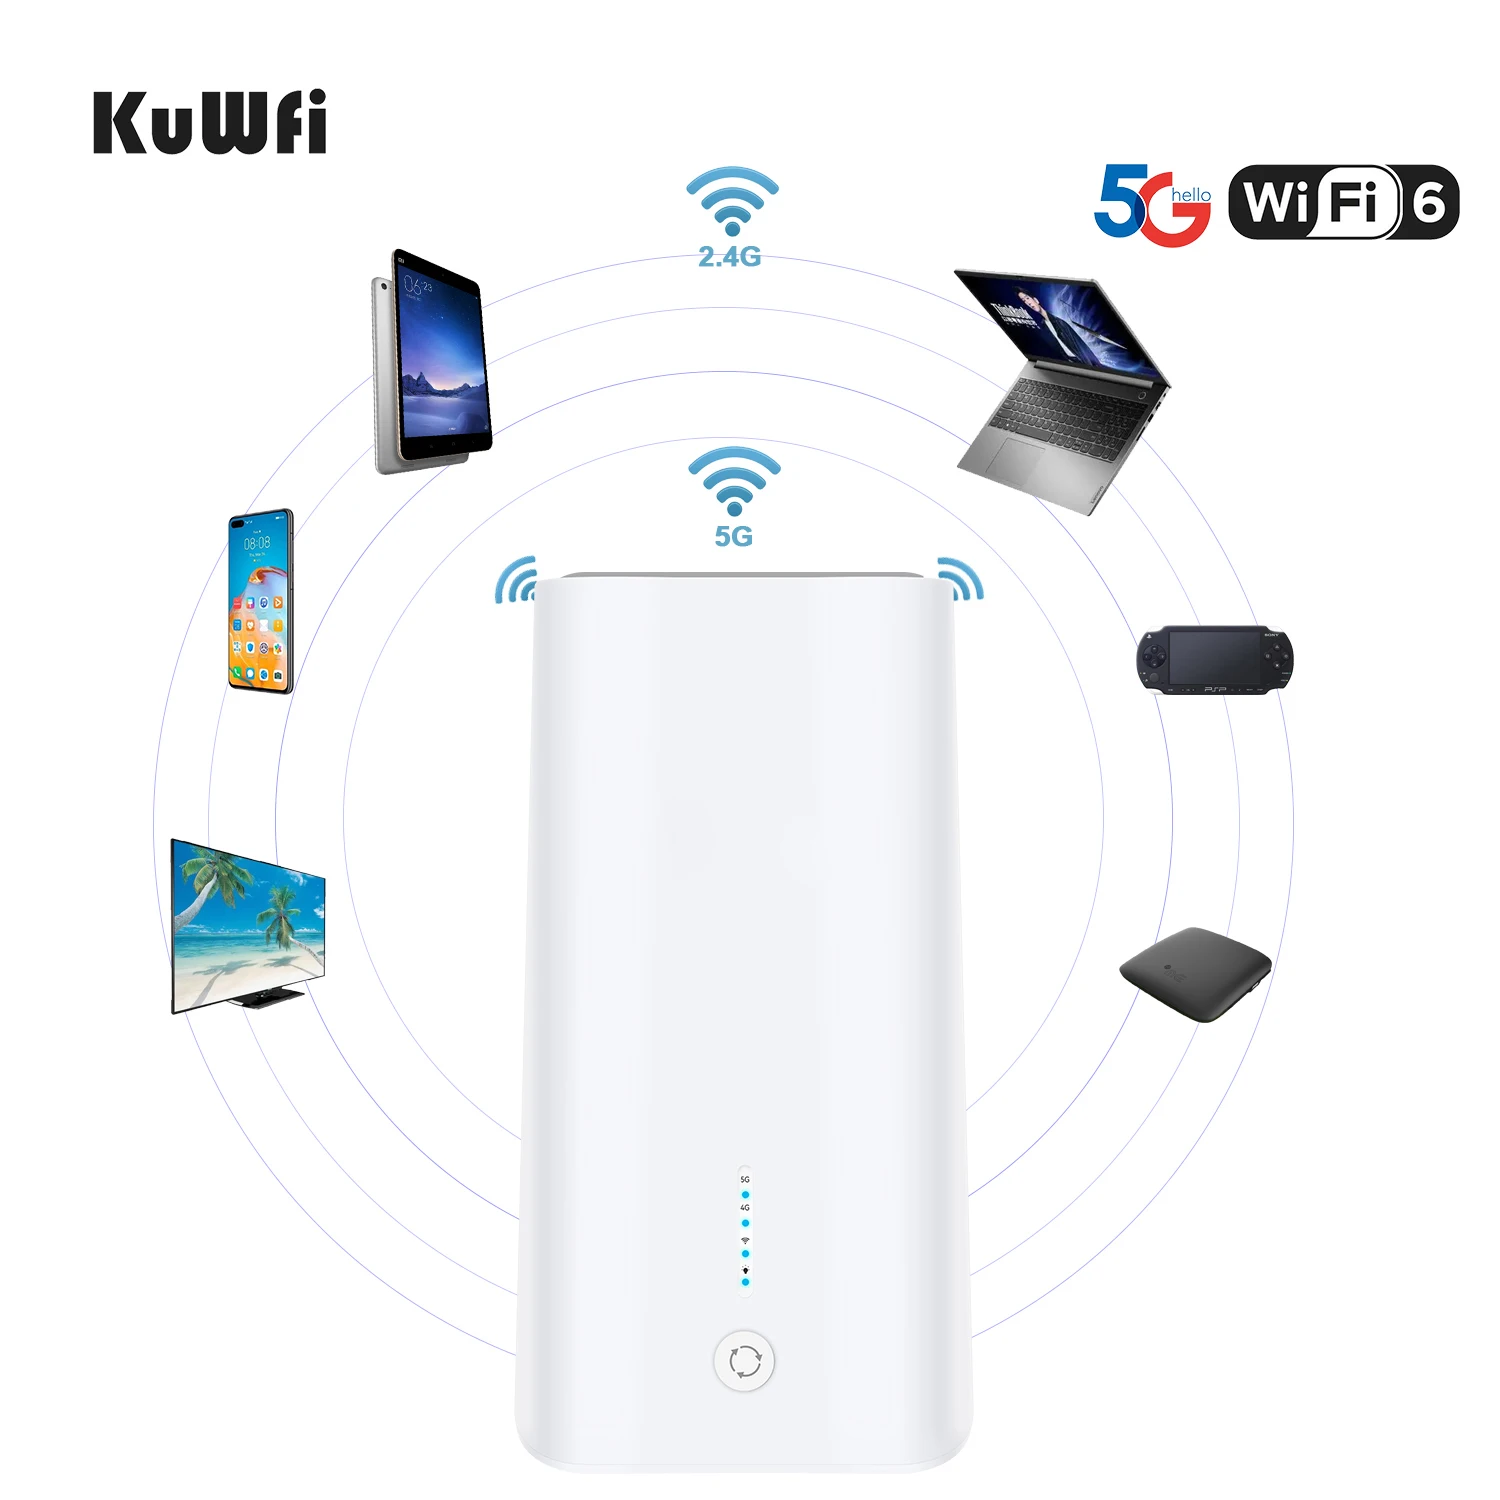 

1800Mbps 160MHz KuWFi WiFi 6 dual band built in 5dBi MIMO Antenna gigabit ethernet NAS/SA dual-mode 5G wifi router for home